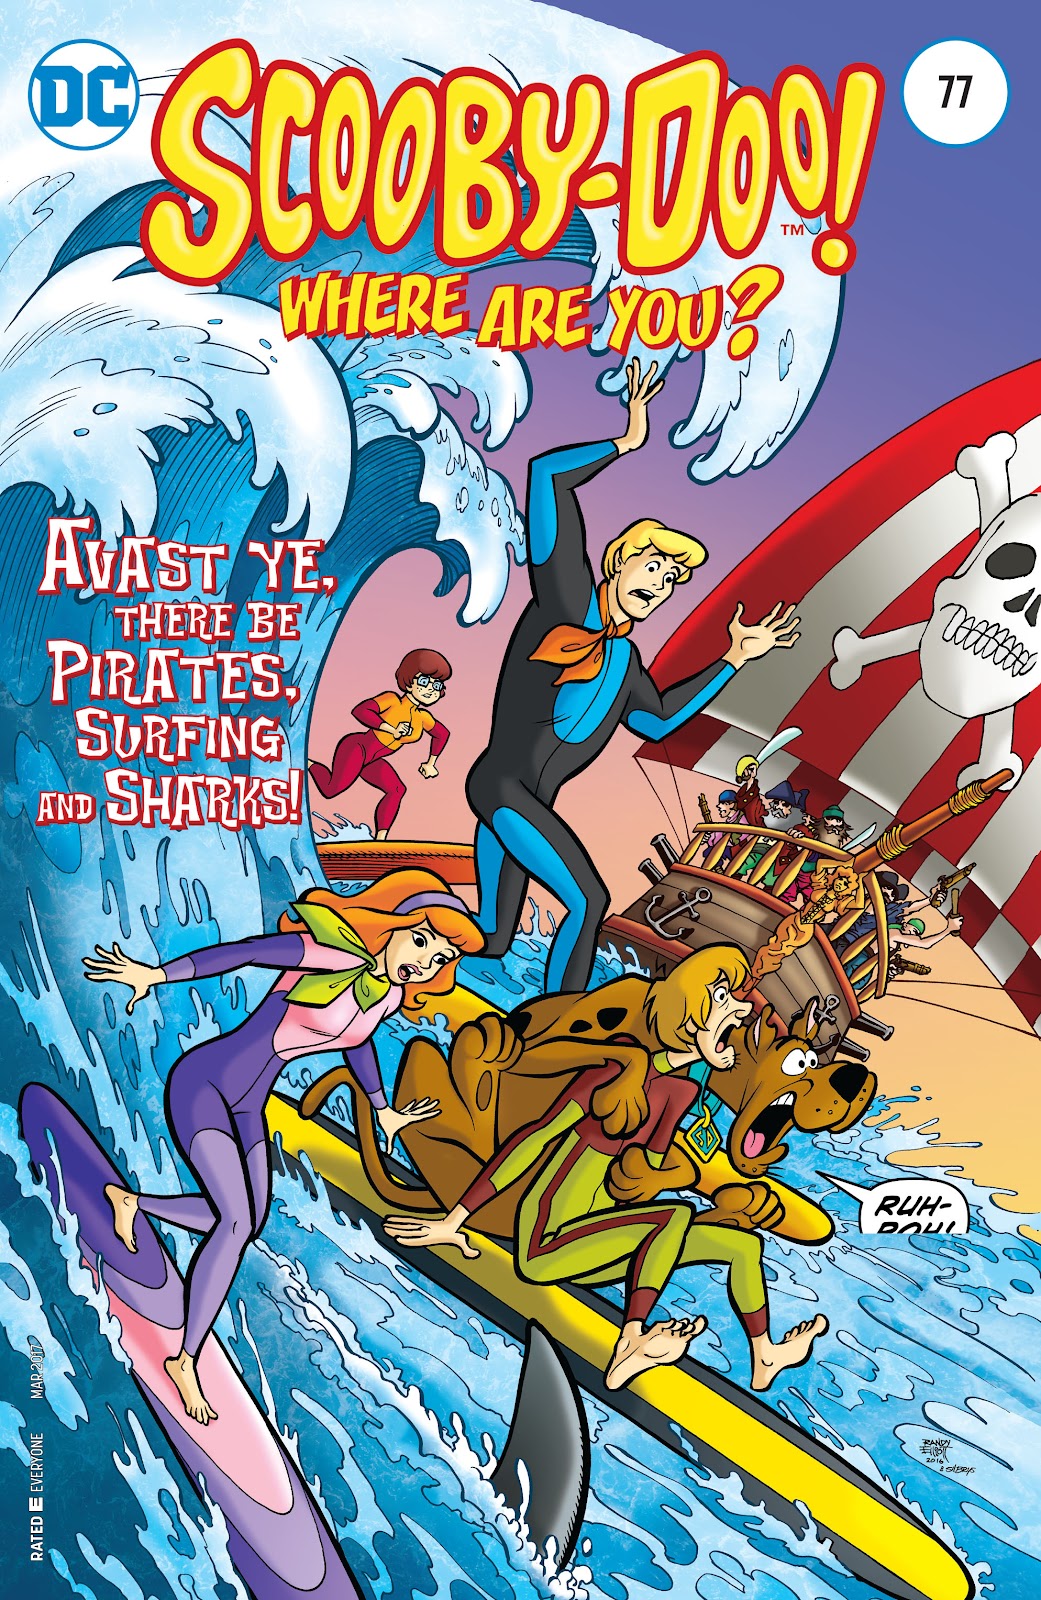 Scooby-Doo: Where Are You? issue 77 - Page 1